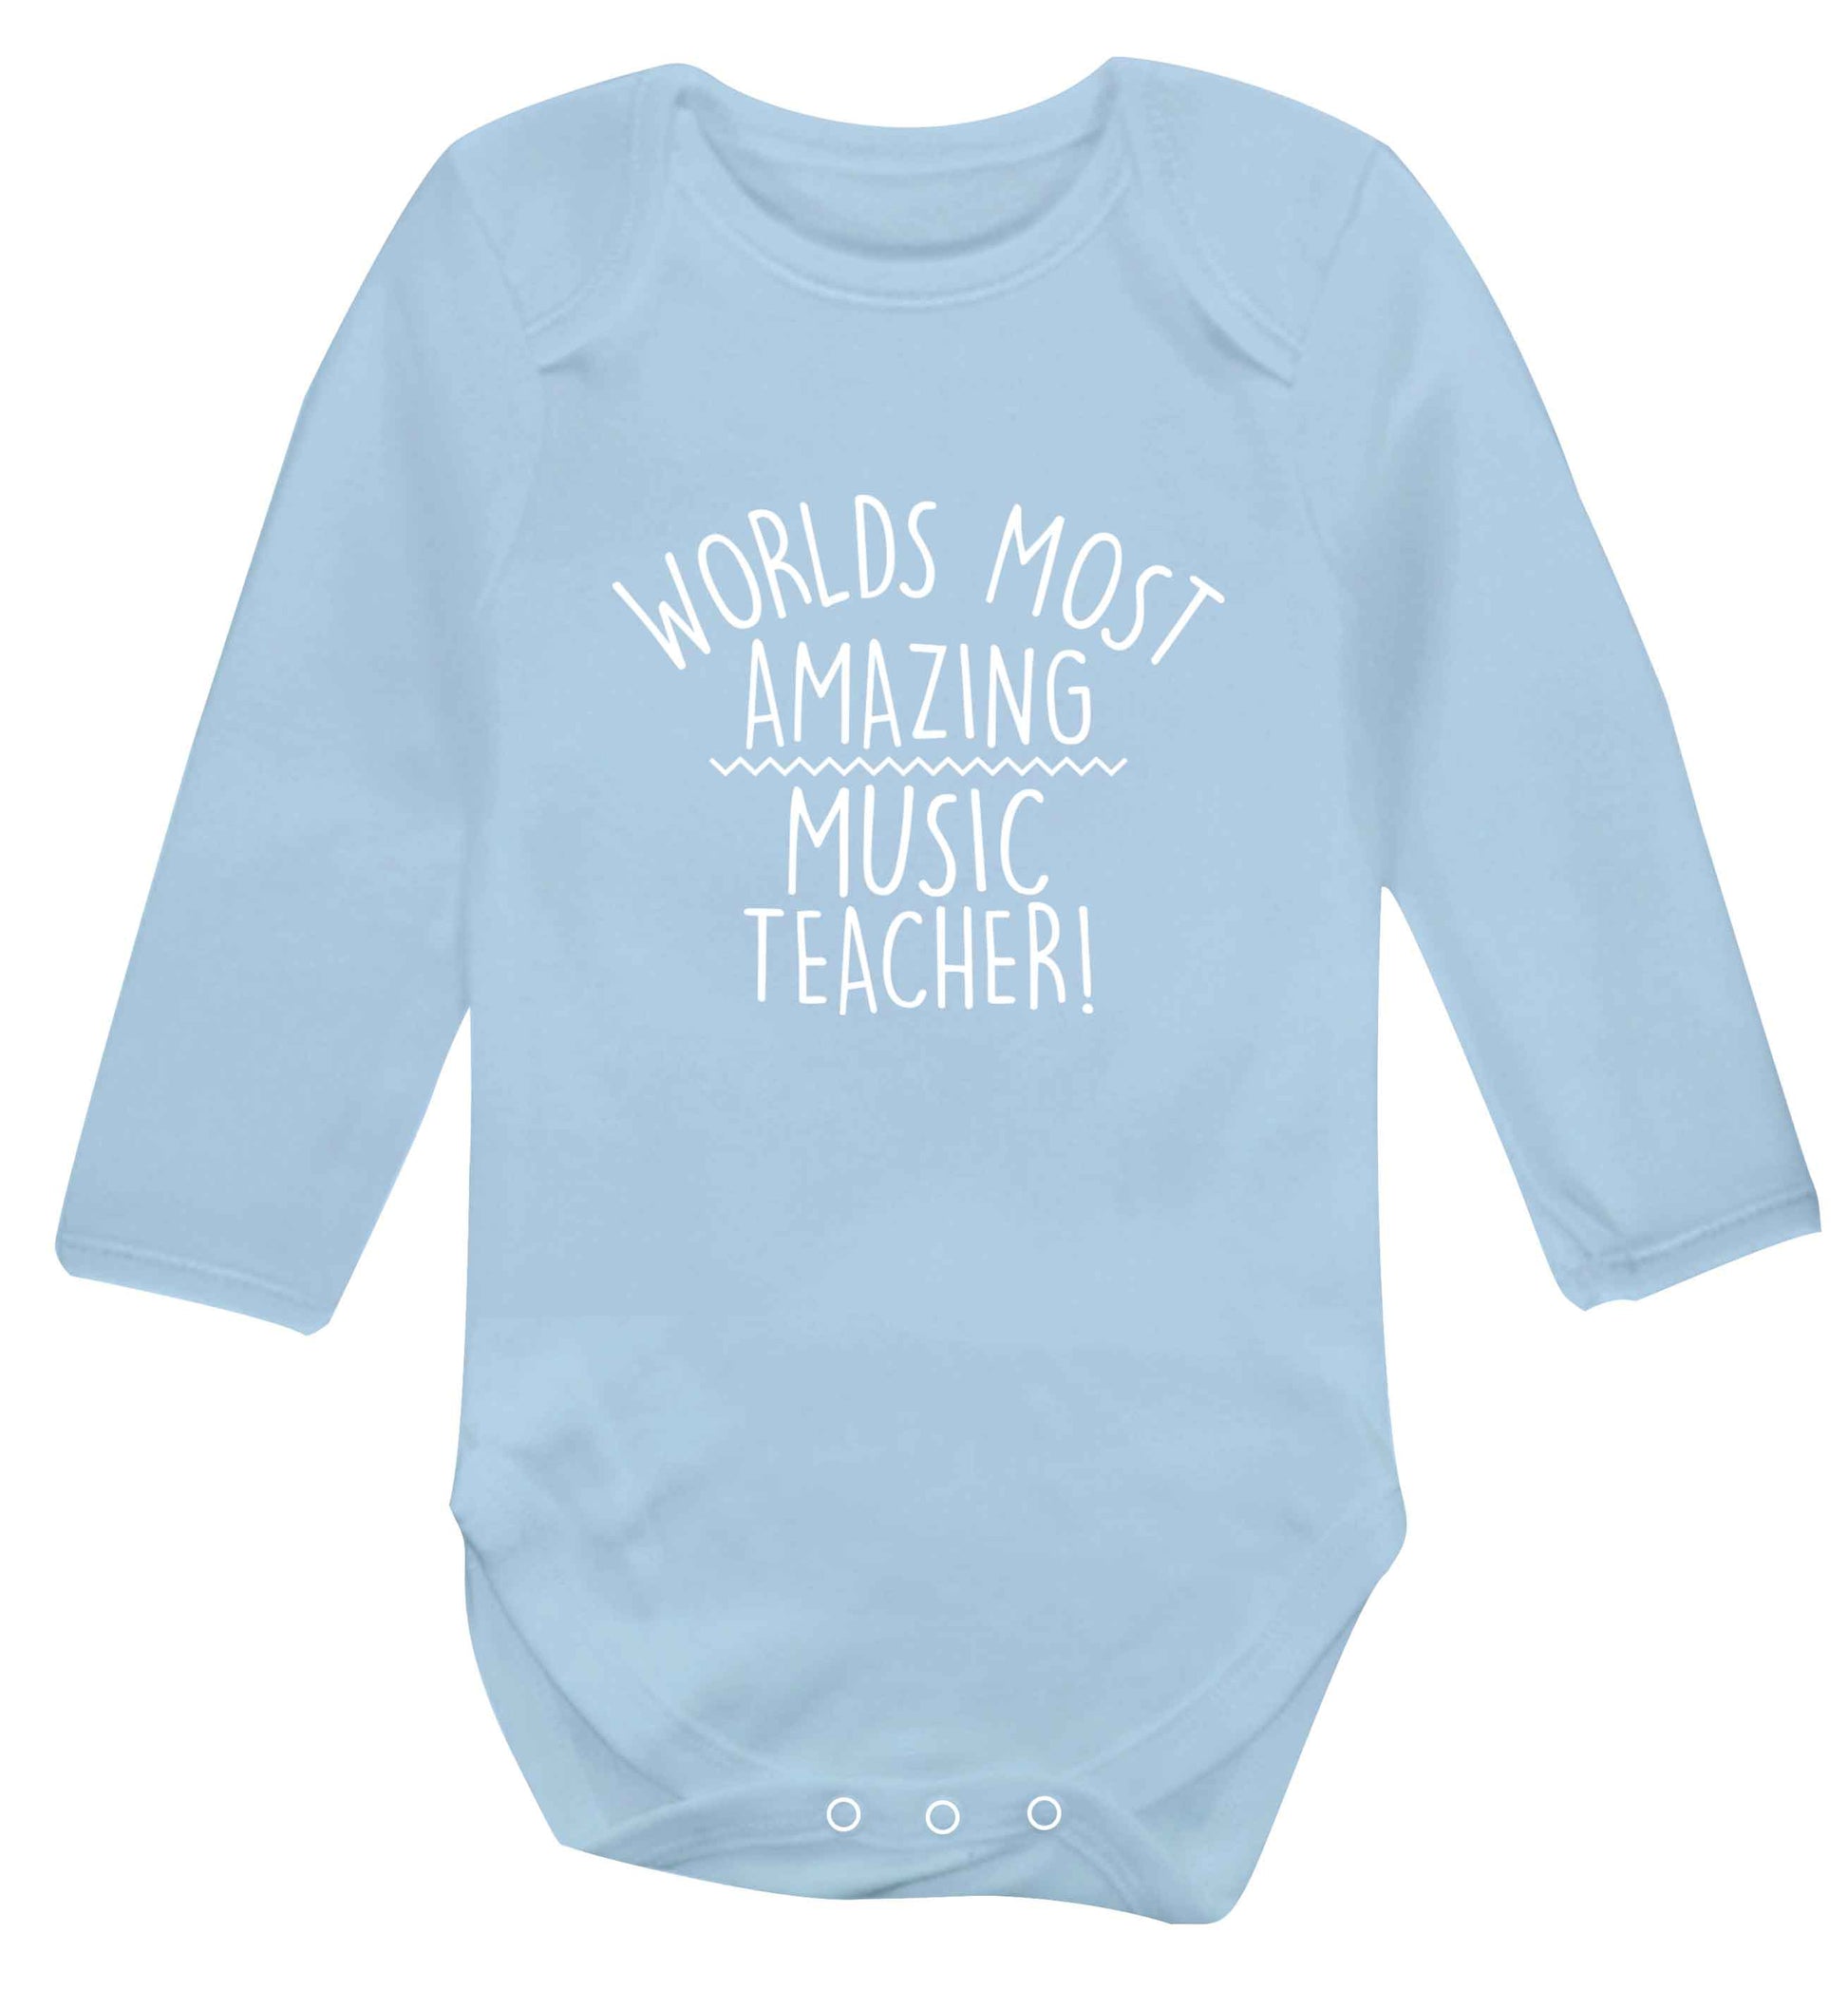 Worlds most amazing music teacher baby vest long sleeved pale blue 6-12 months